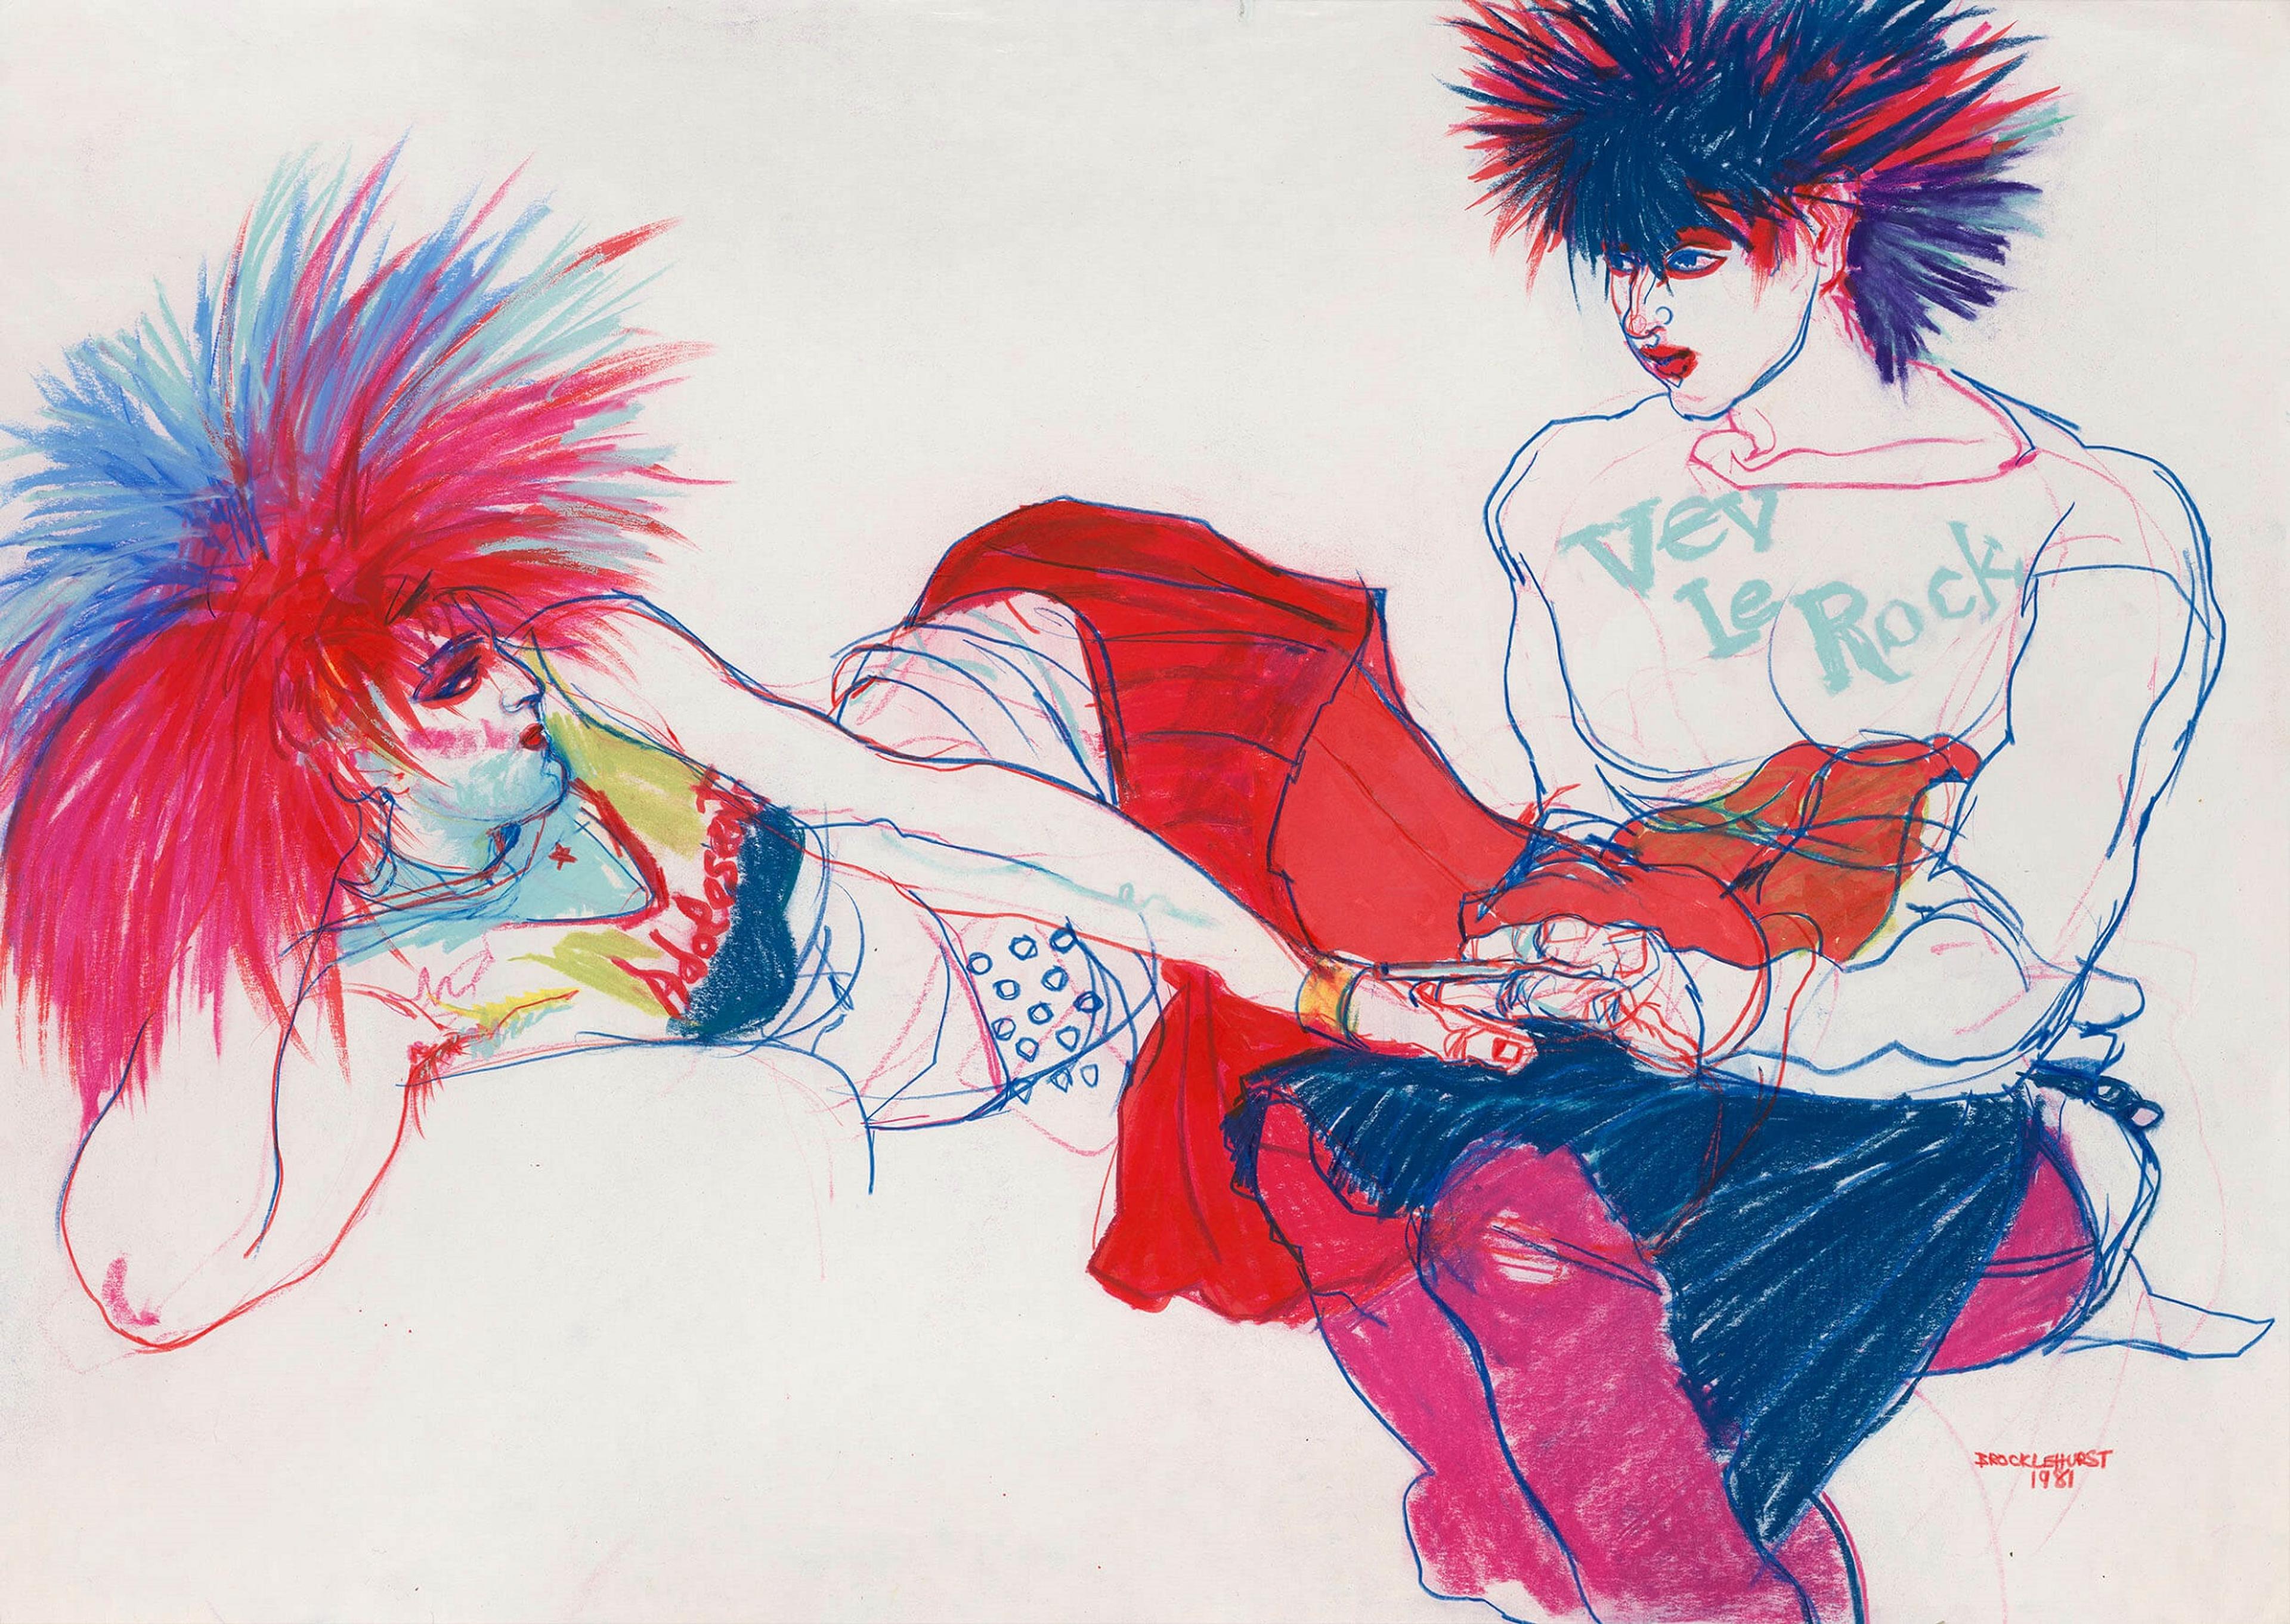 Drawing of two people with spiky multicoloured hair holding hands and looking at each other